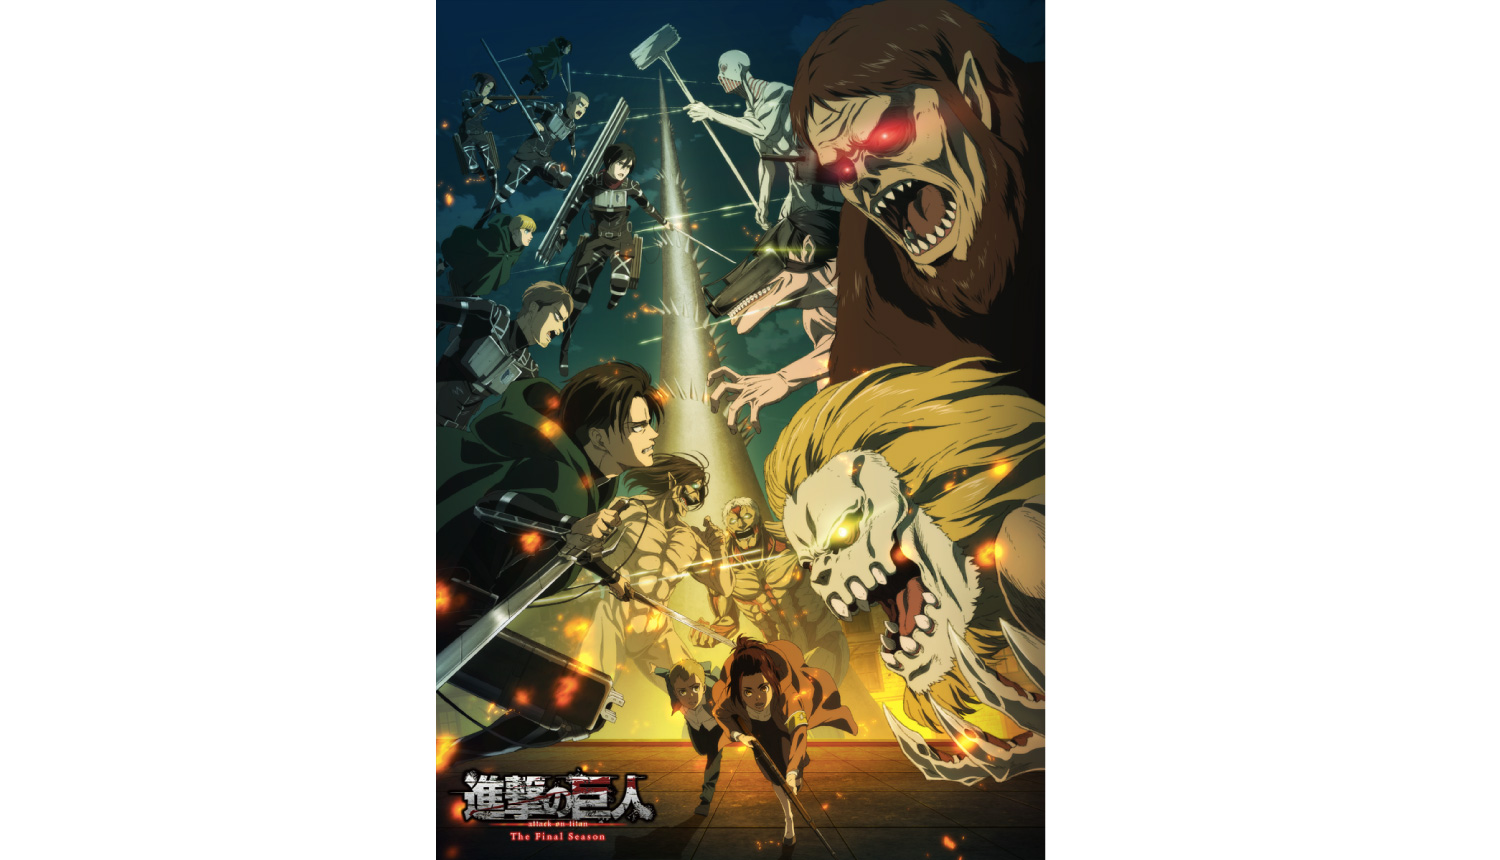 Attack on Titan The Final Season Part 3 Anime's 1st Half Airs as 1-Hour  Special on March 3 - News - Anime News Network